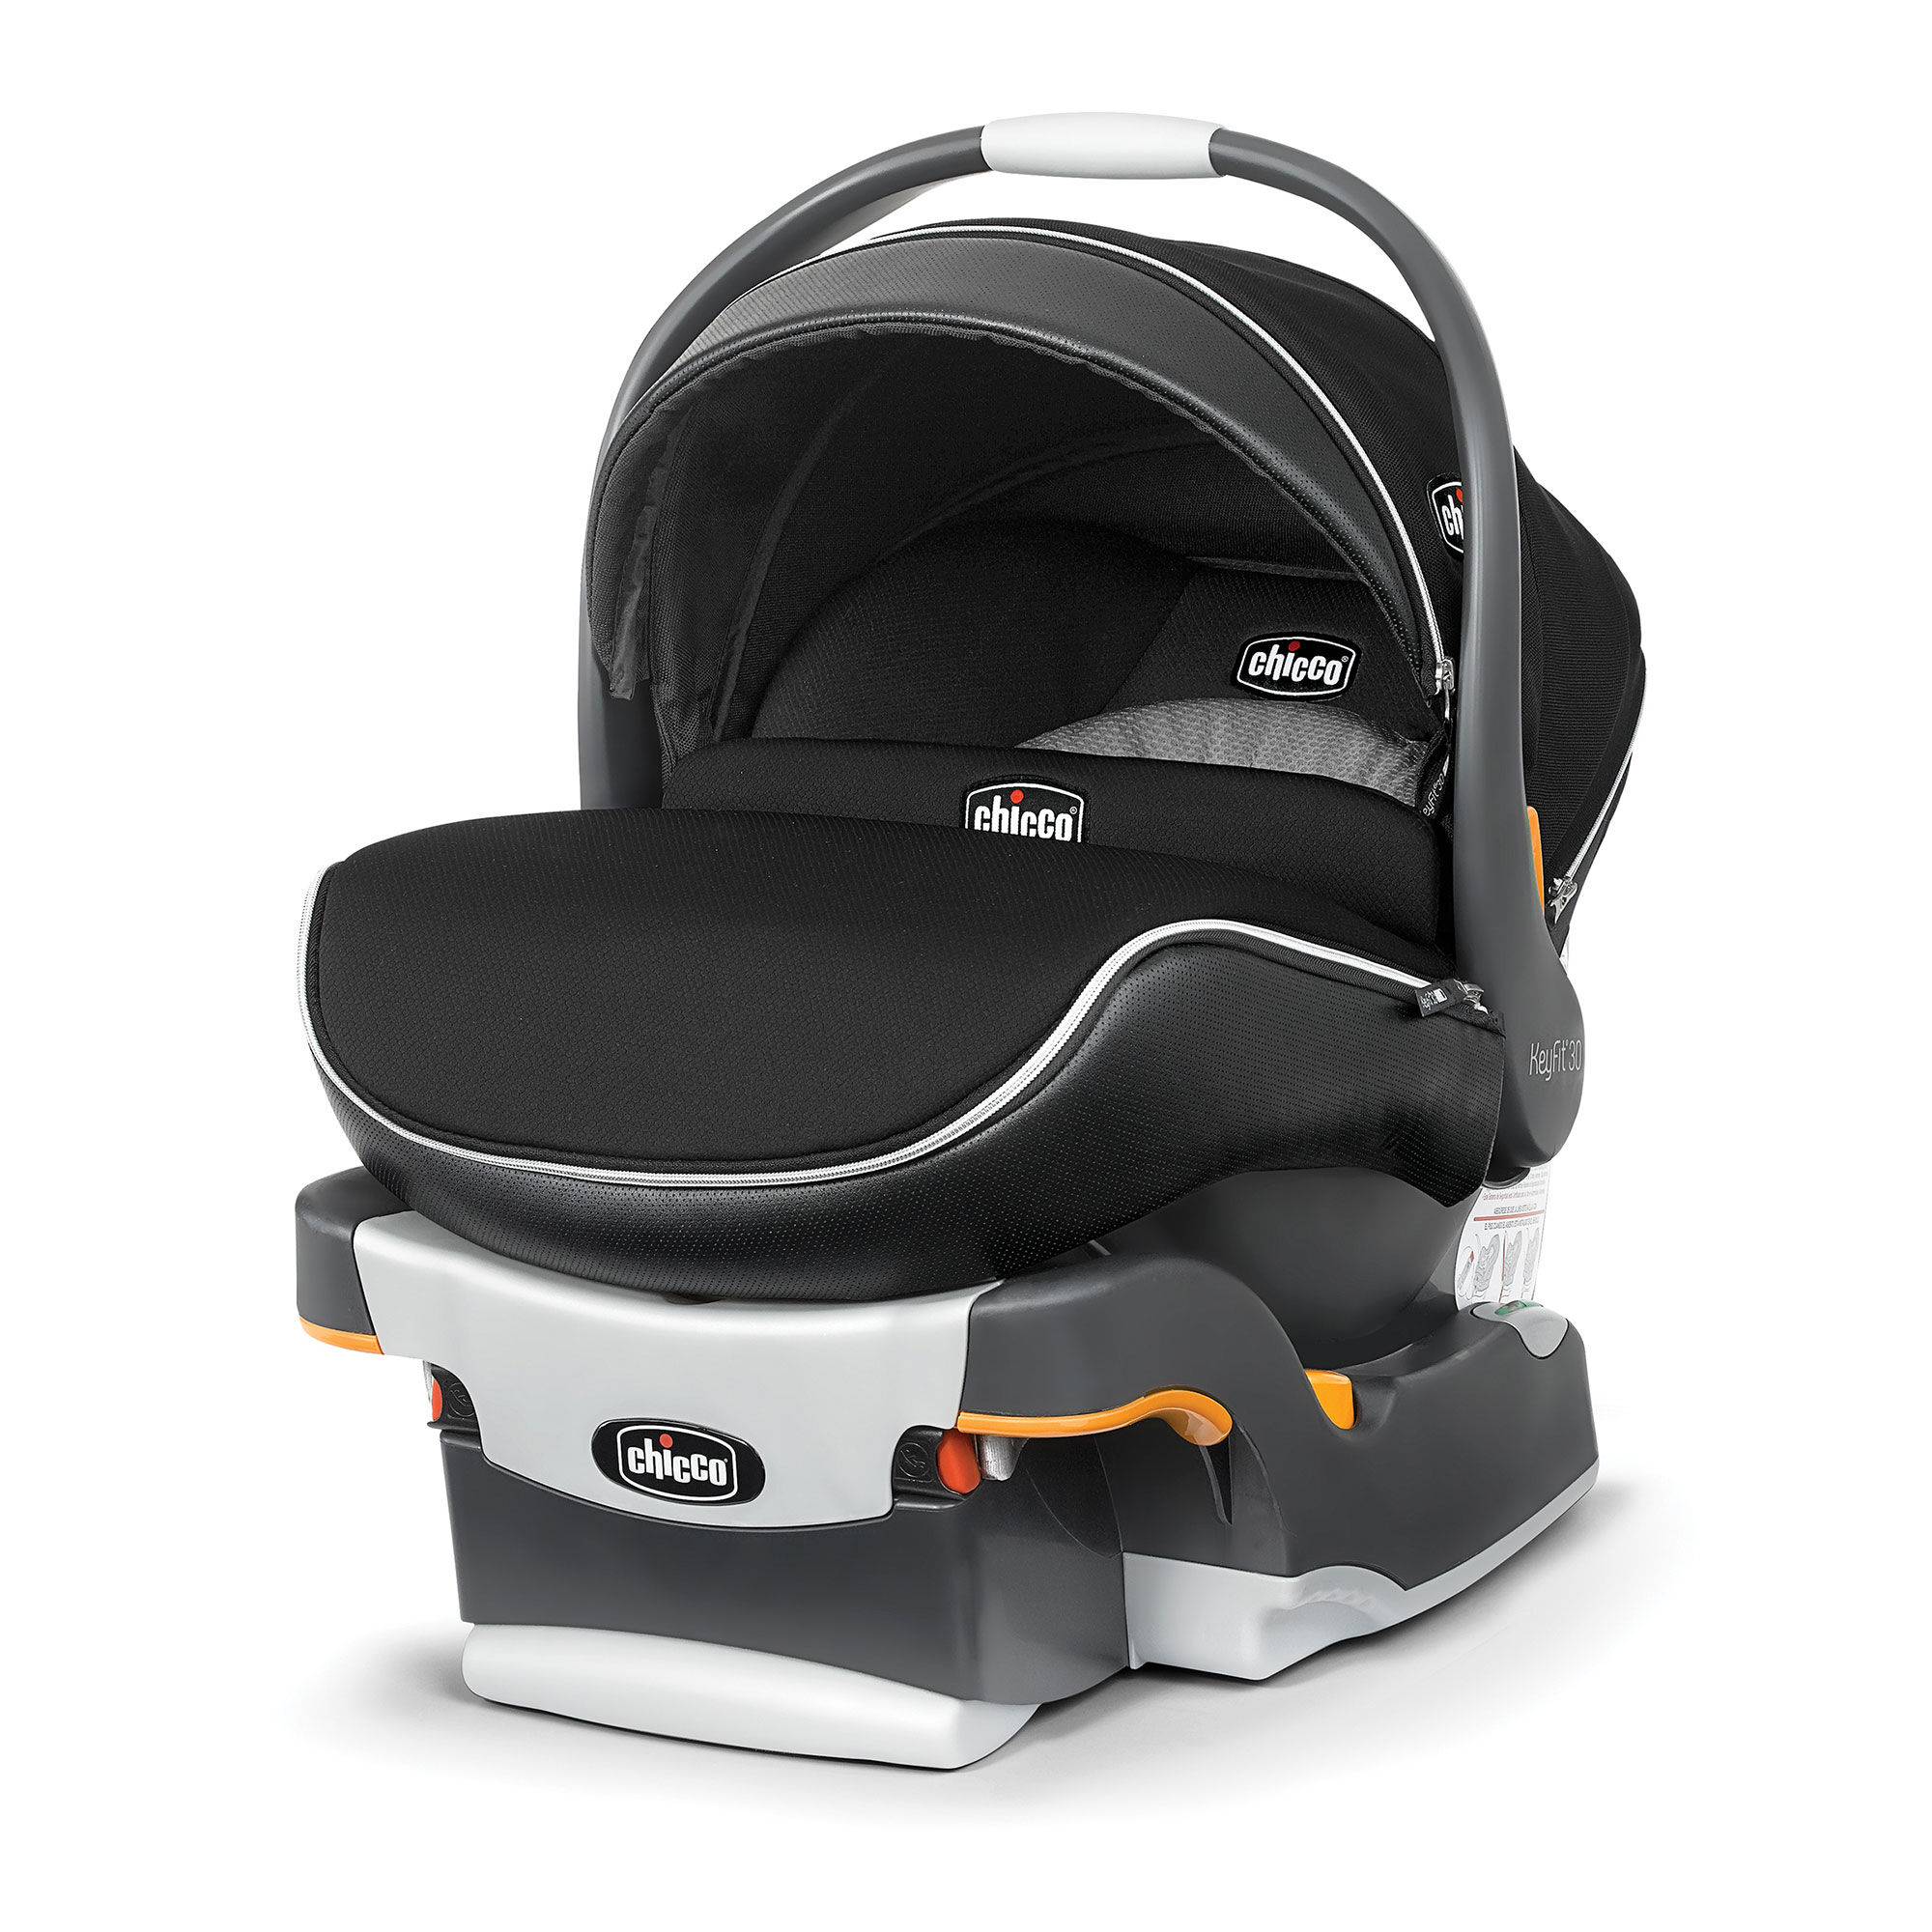 chicco bravo infant car seat weight limit